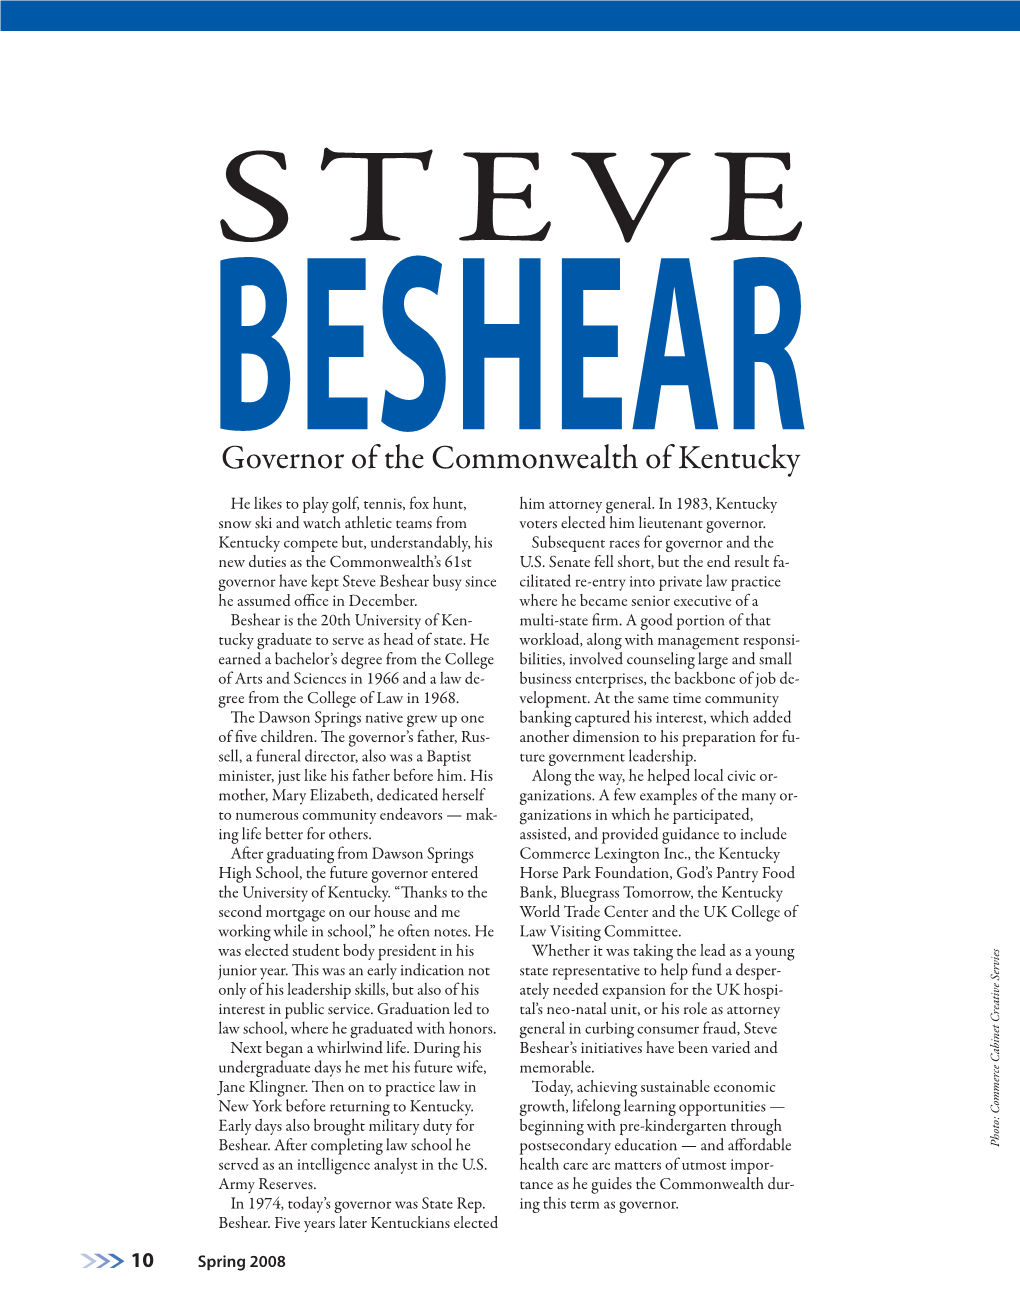 Steve Beshear Busy Since Cilitated Re-Entry Into Private Law Practice He Assumed Oﬃce in December